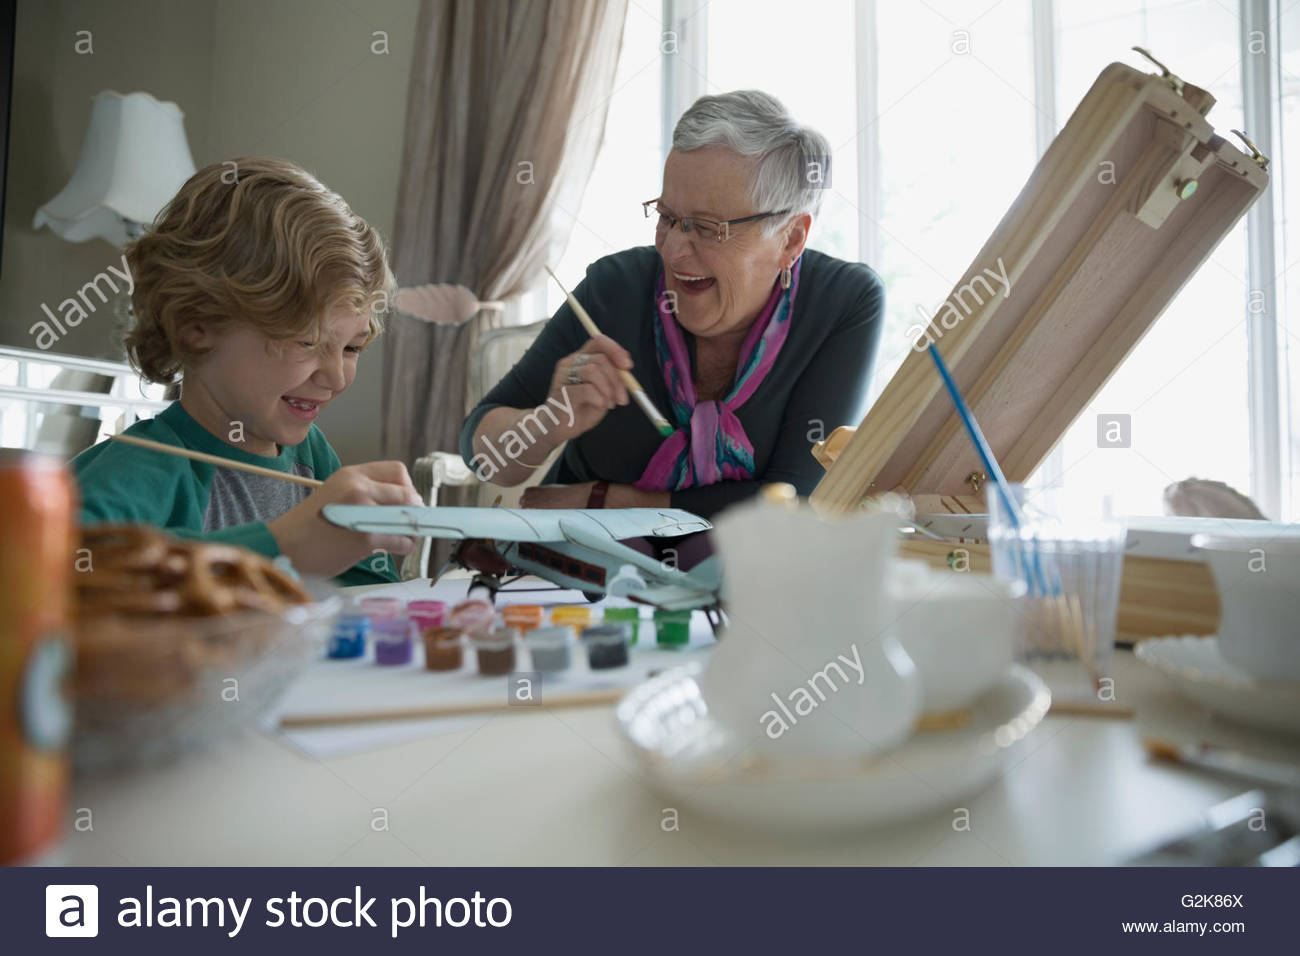 Grandmother and grandson painting Stock Photo